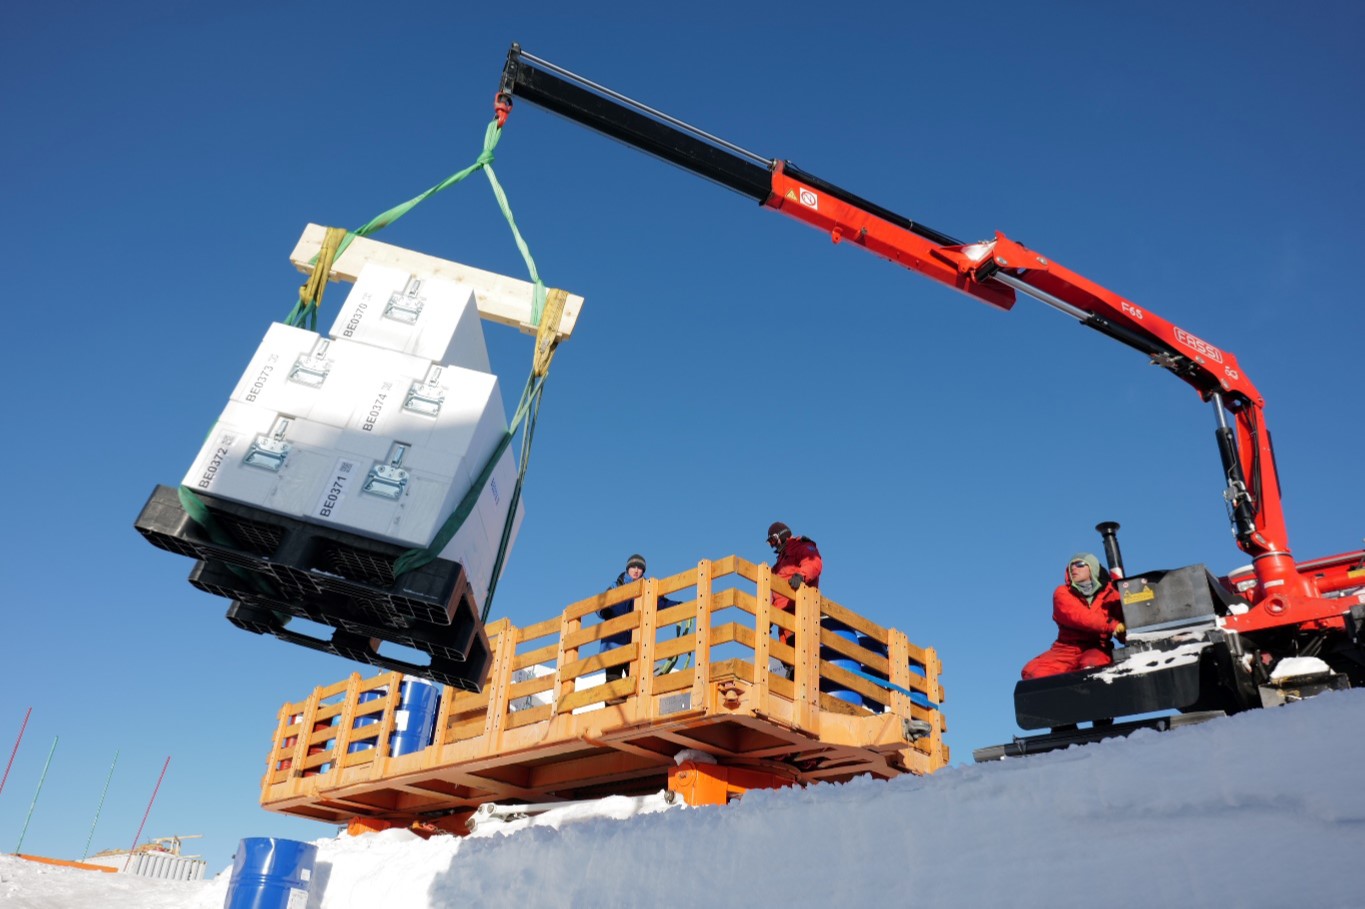 Lifting ice core boxes from the core buffer onto a trailer to transport them to Concordia for long-term storage